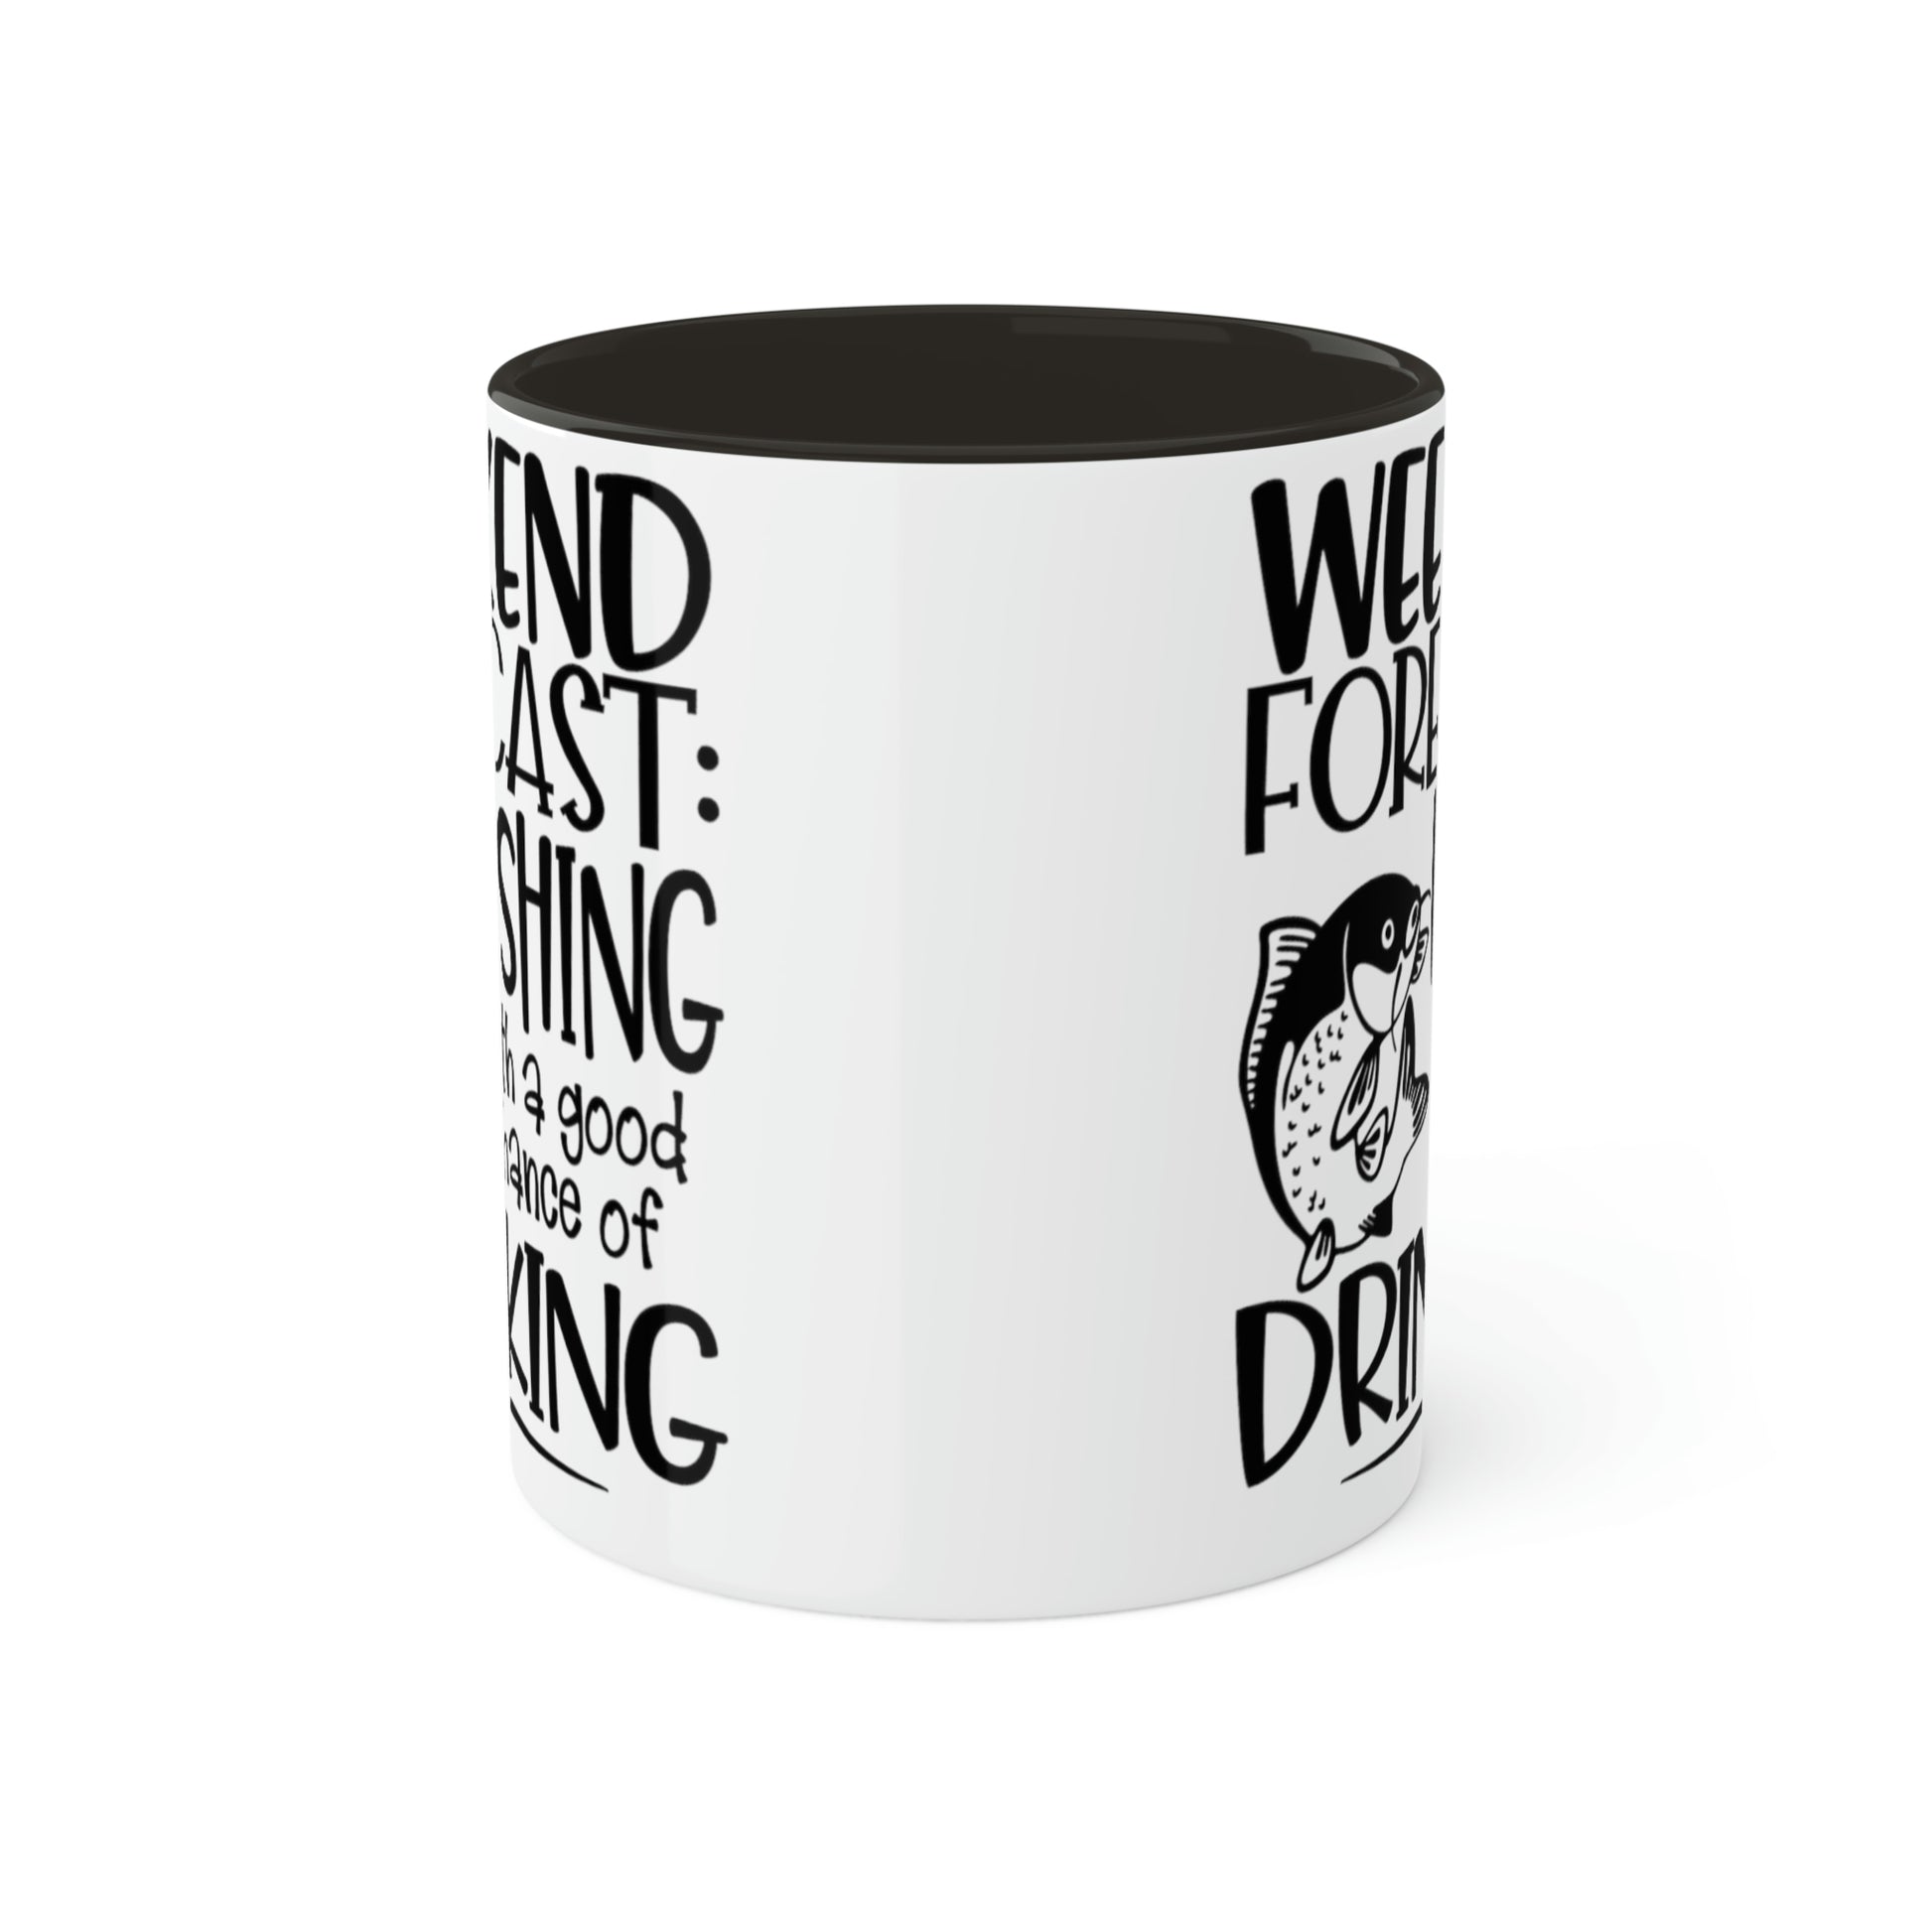     weekend-forecast-fishing-with-a-good-chance-of-drinking-glossy-mug-11-oz-orca-coating-front-side